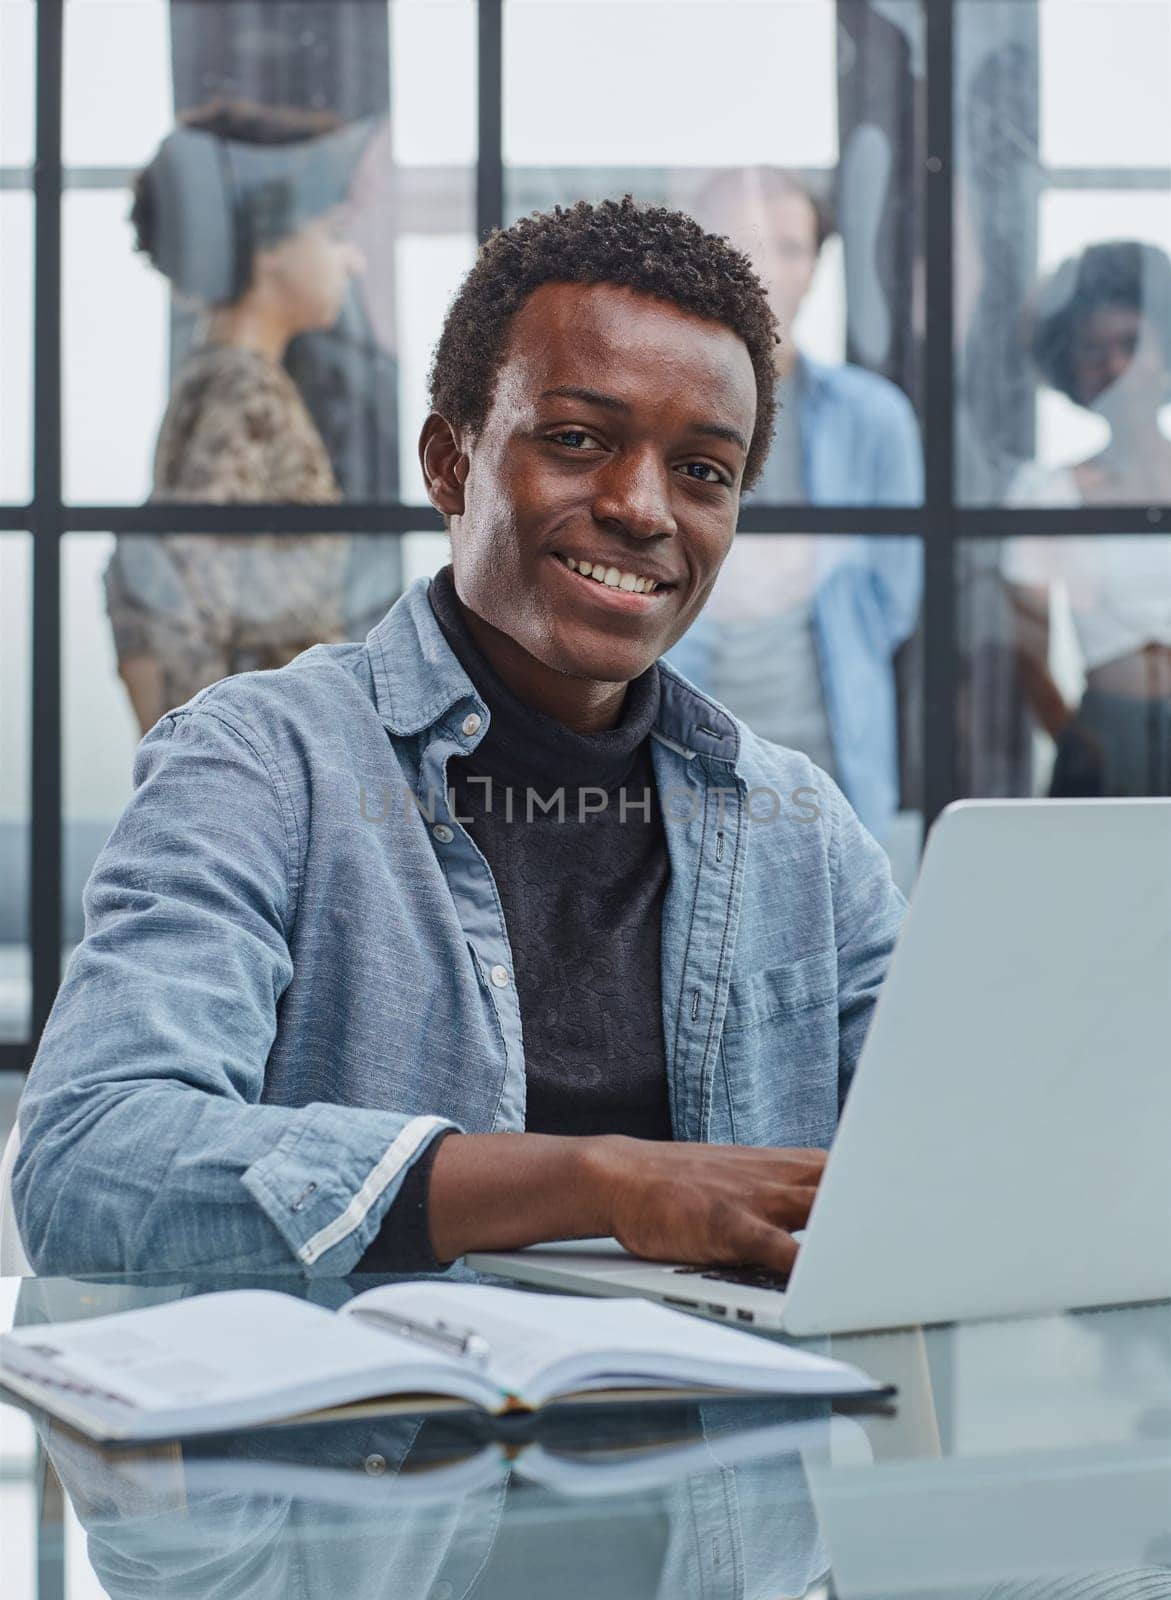 smiling leader business man with executives working on laptop in background.